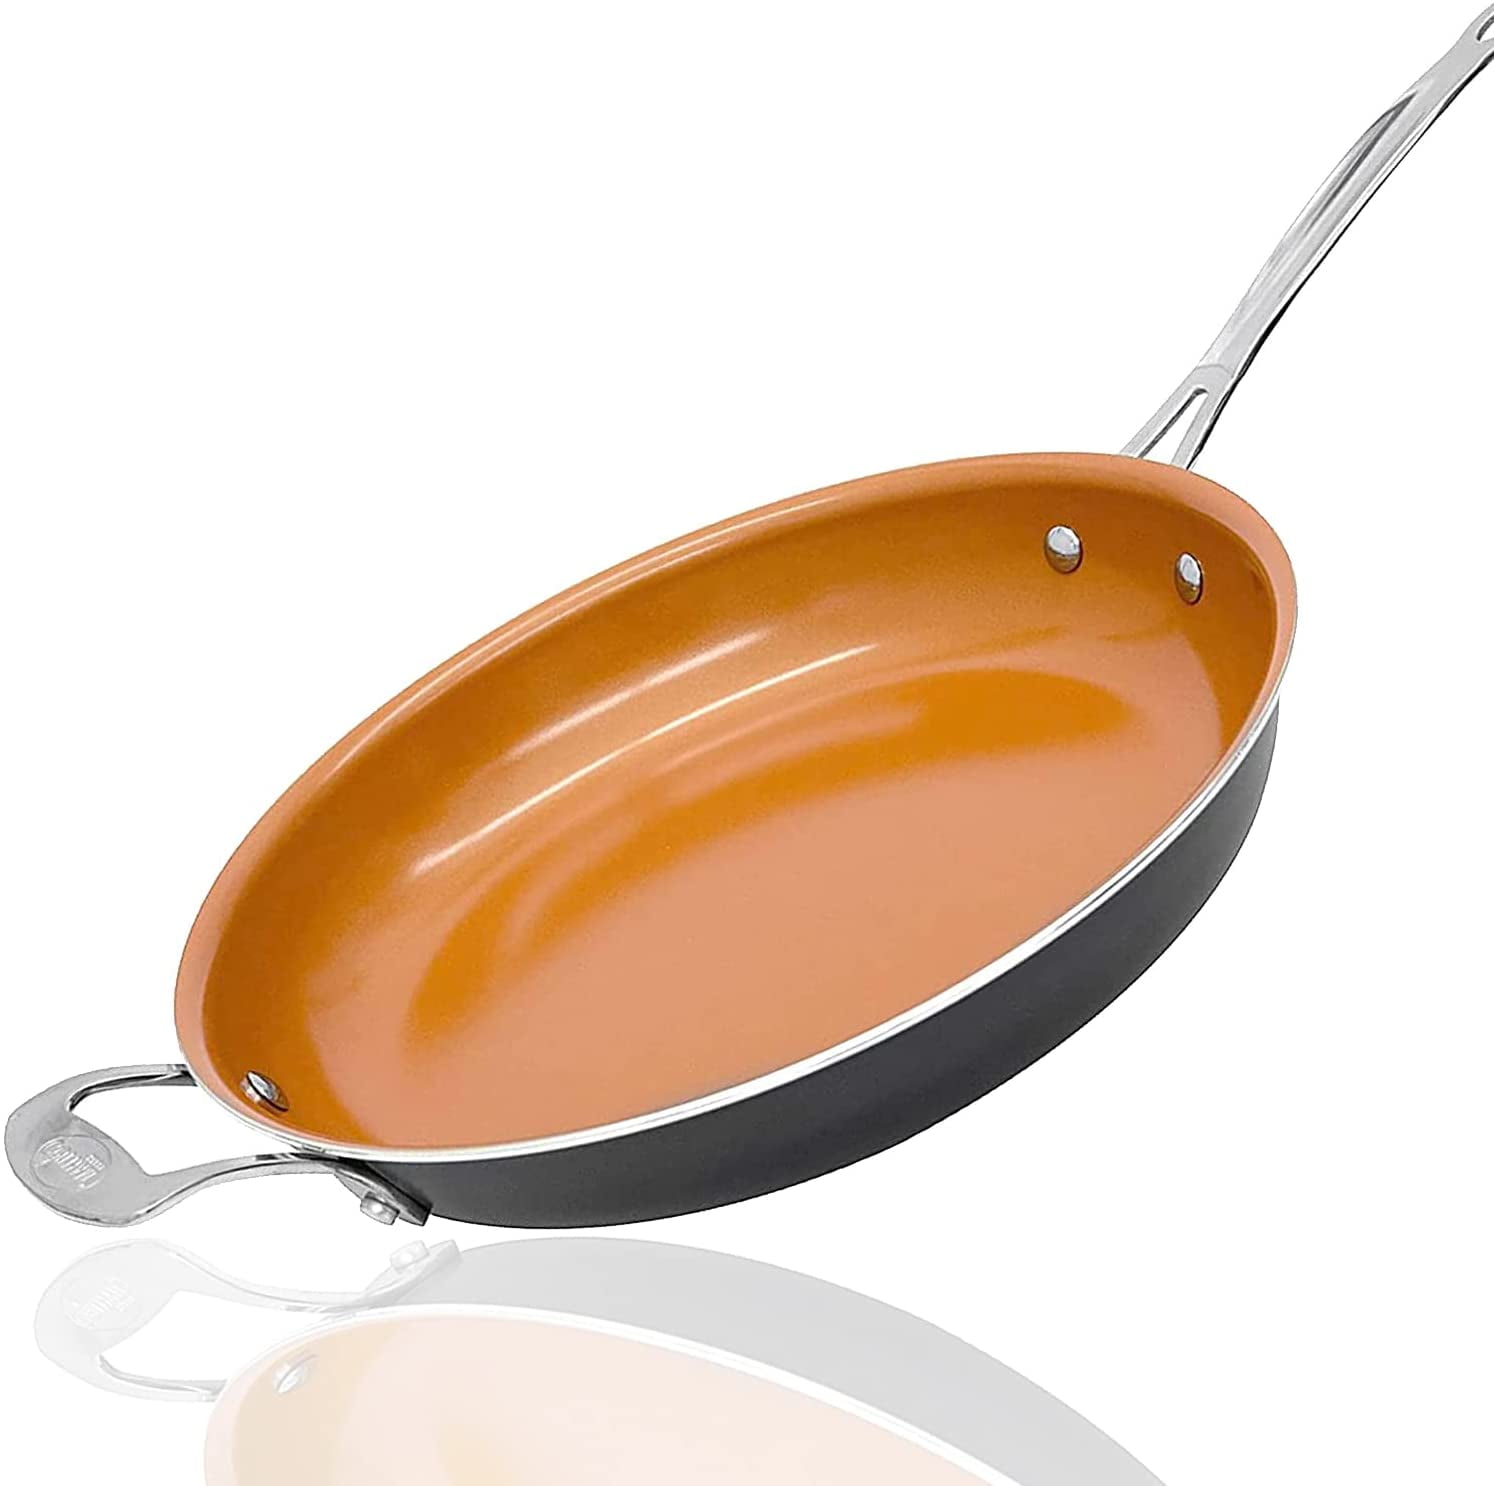 Gotham Steel Hammered Copper 14 Nonstick Family Fry Pan with